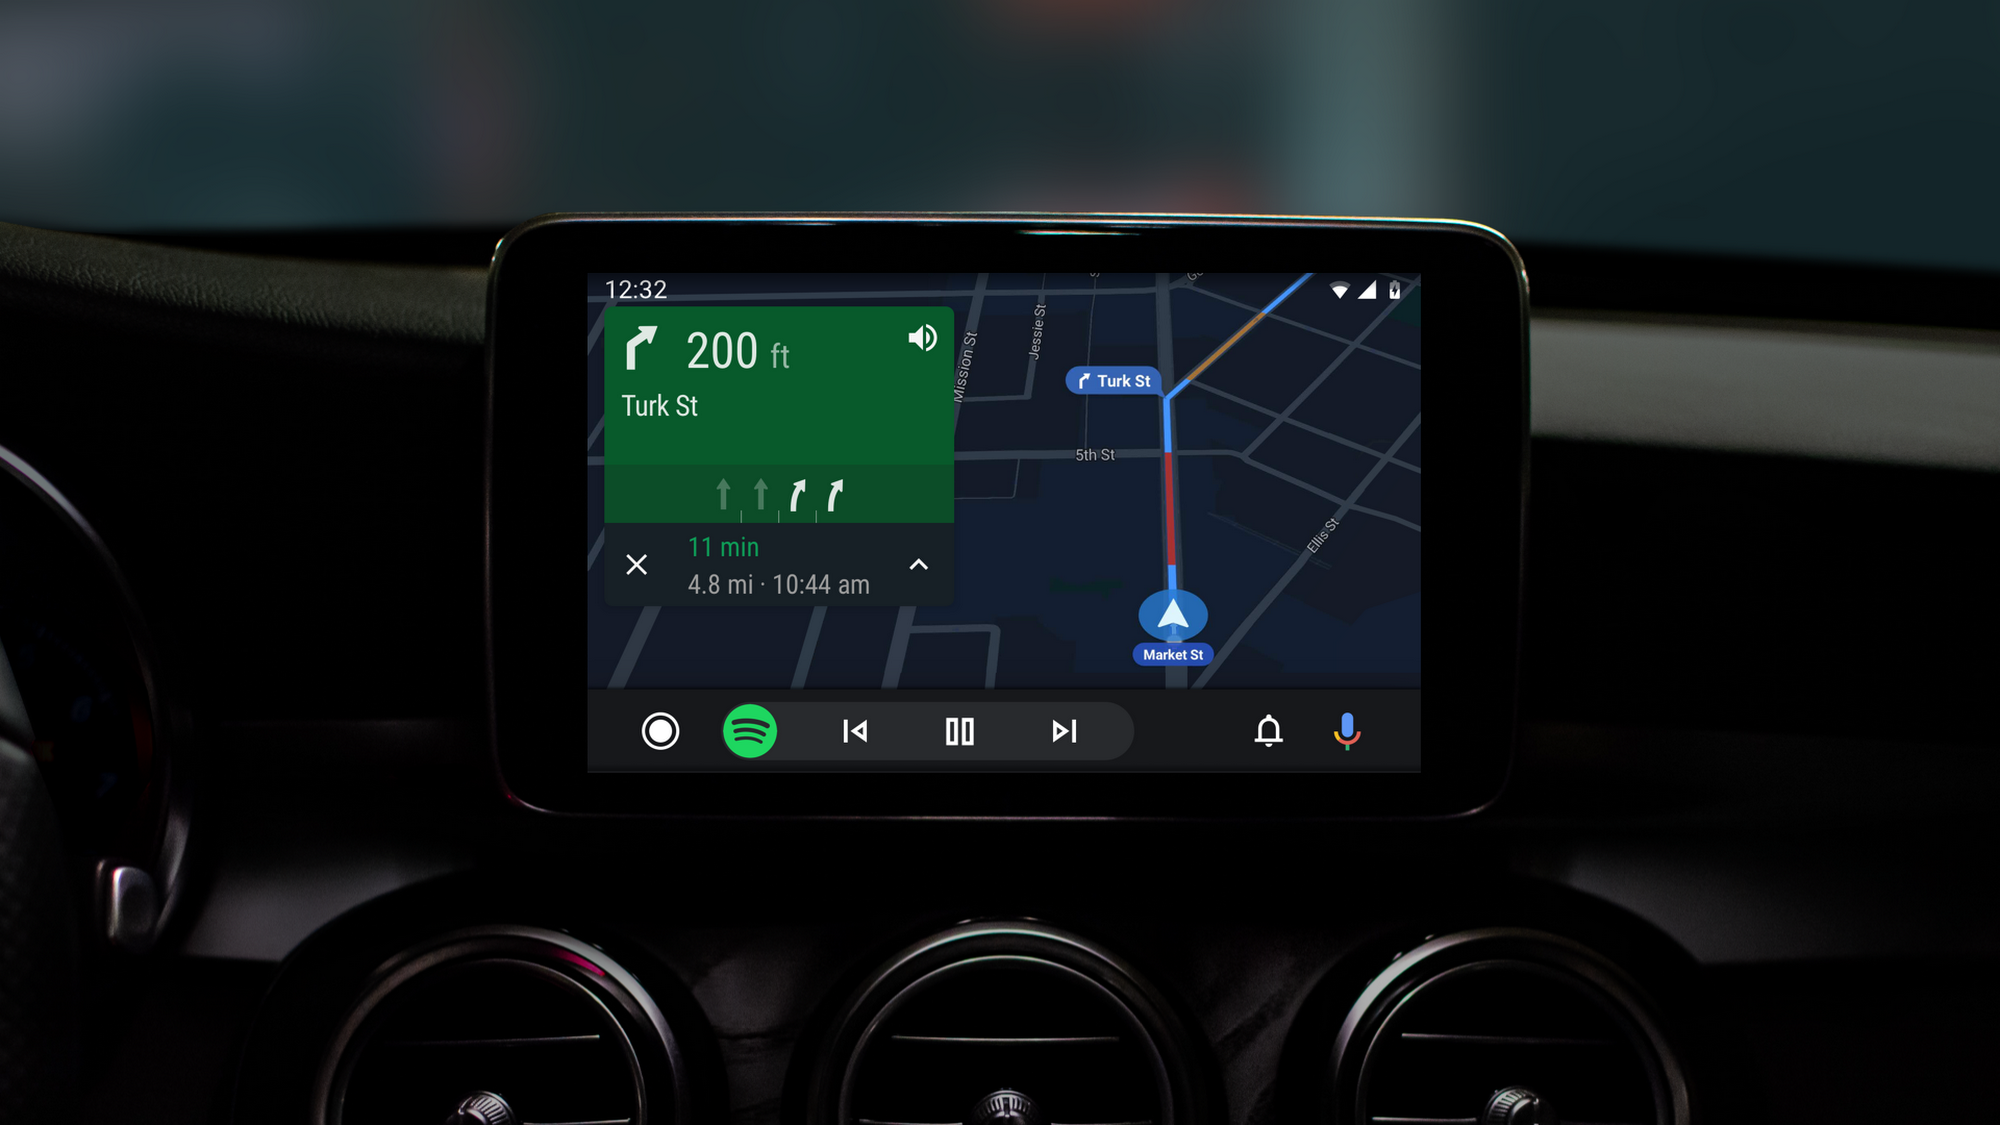 Samsung becomes only the second OEM to support Android Auto Wireless